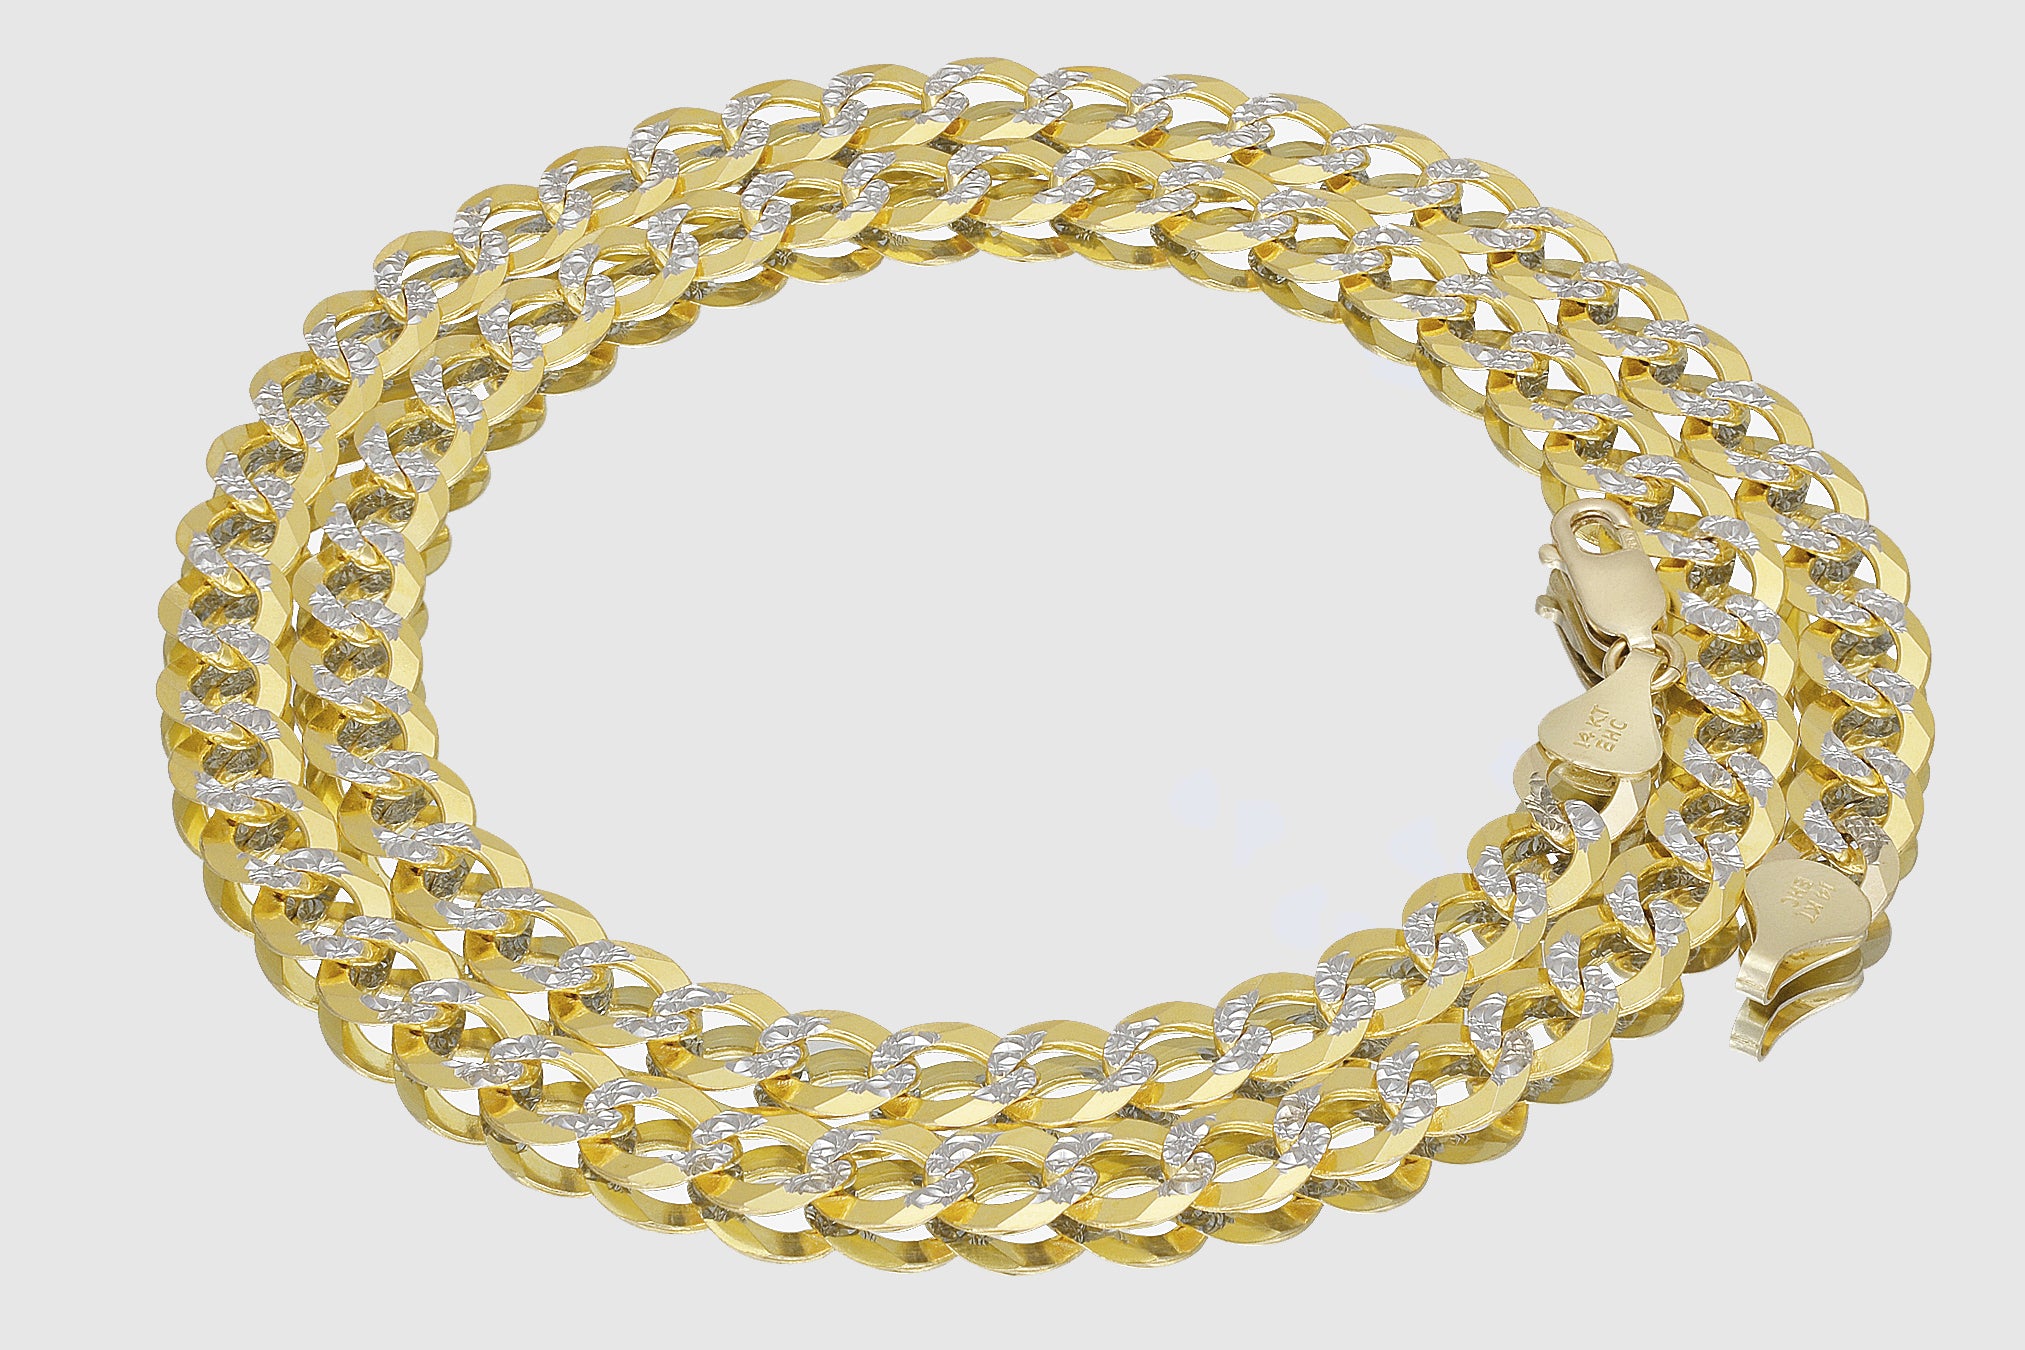 Gold Chain - Pave Curb Link Chain